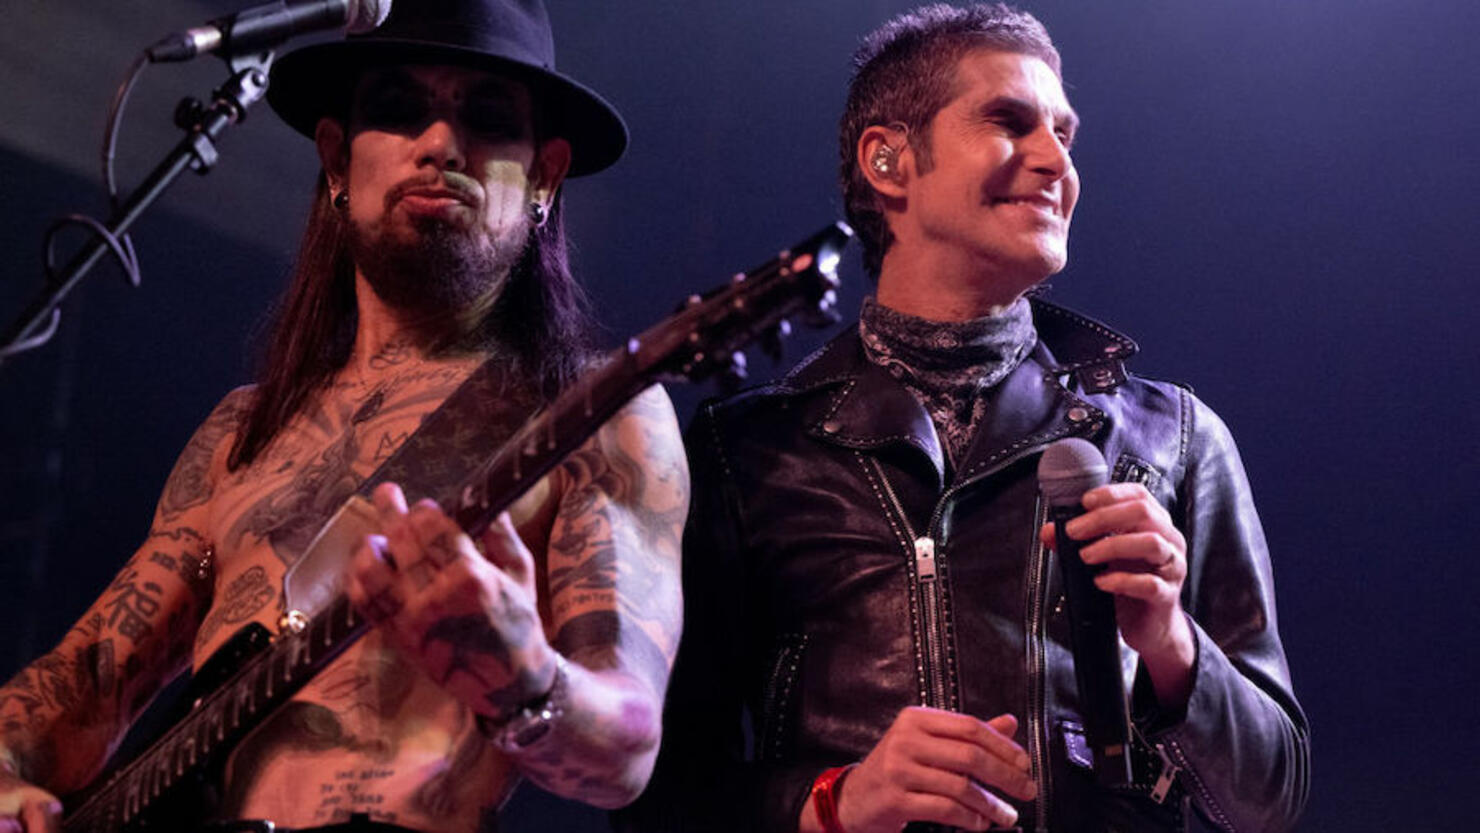 Dave Navarro & Billy Morrison's "ABOVE GROUND 3" Concert Benefiting Musicares